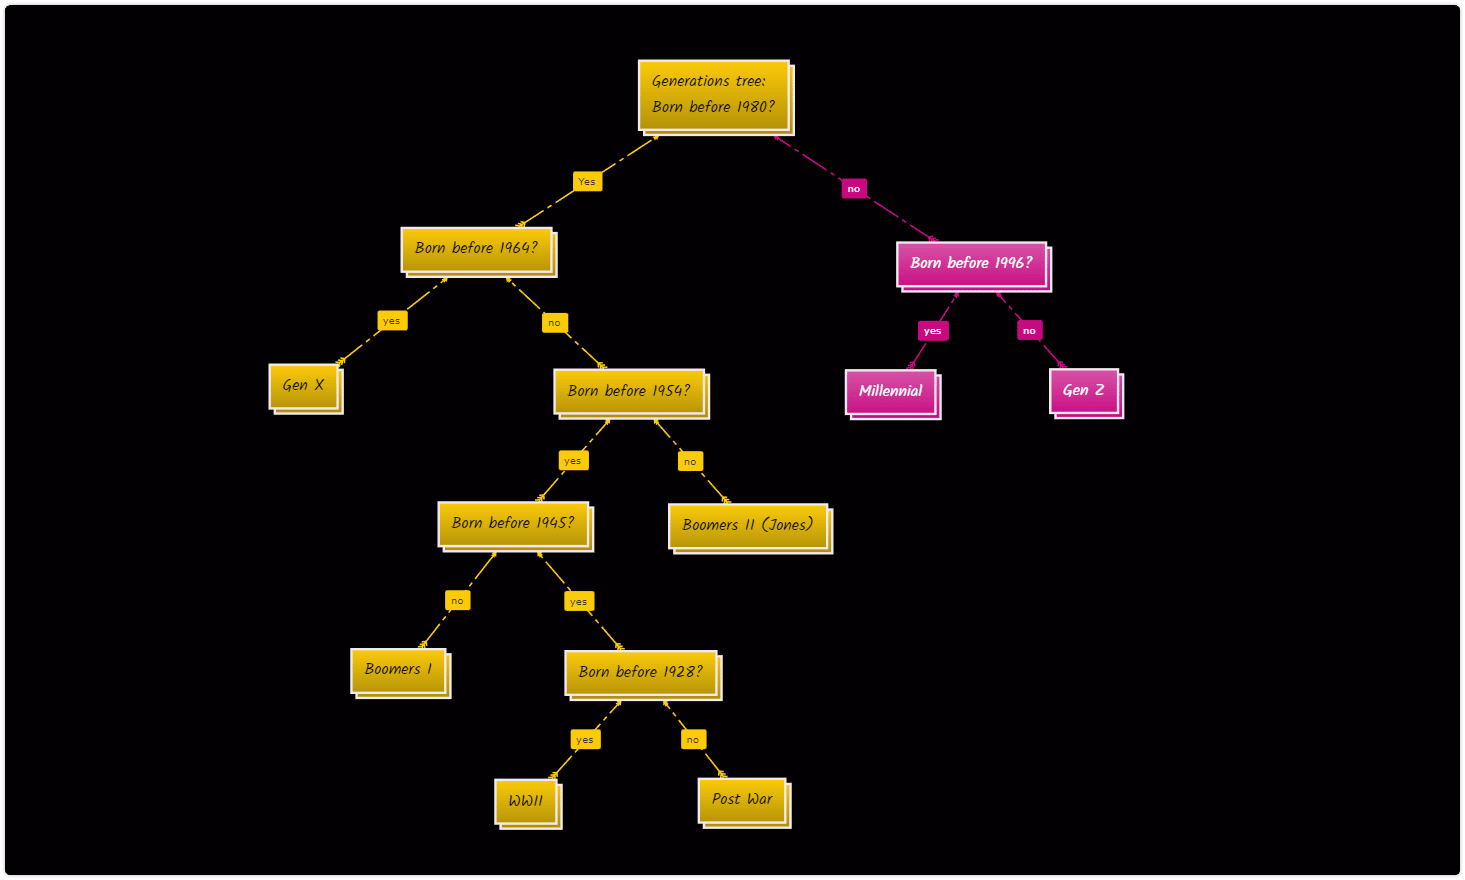 education decision tree about generations